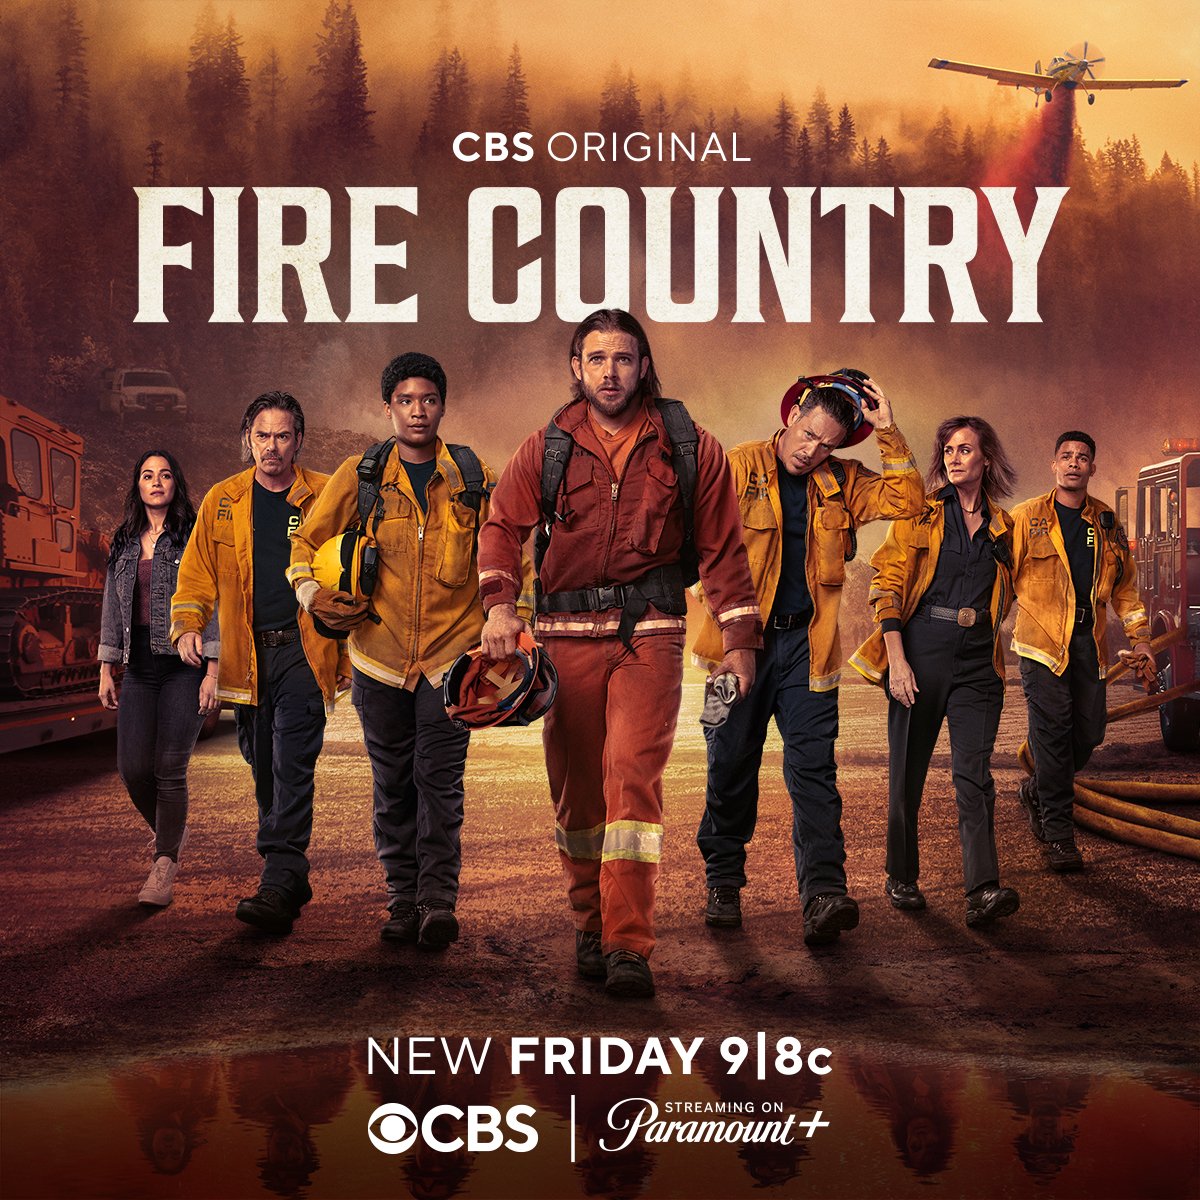 002_J5513_FIRE_COUNTRY_ST_1200x1200_Master_A_001_RK_WK2.jpeg